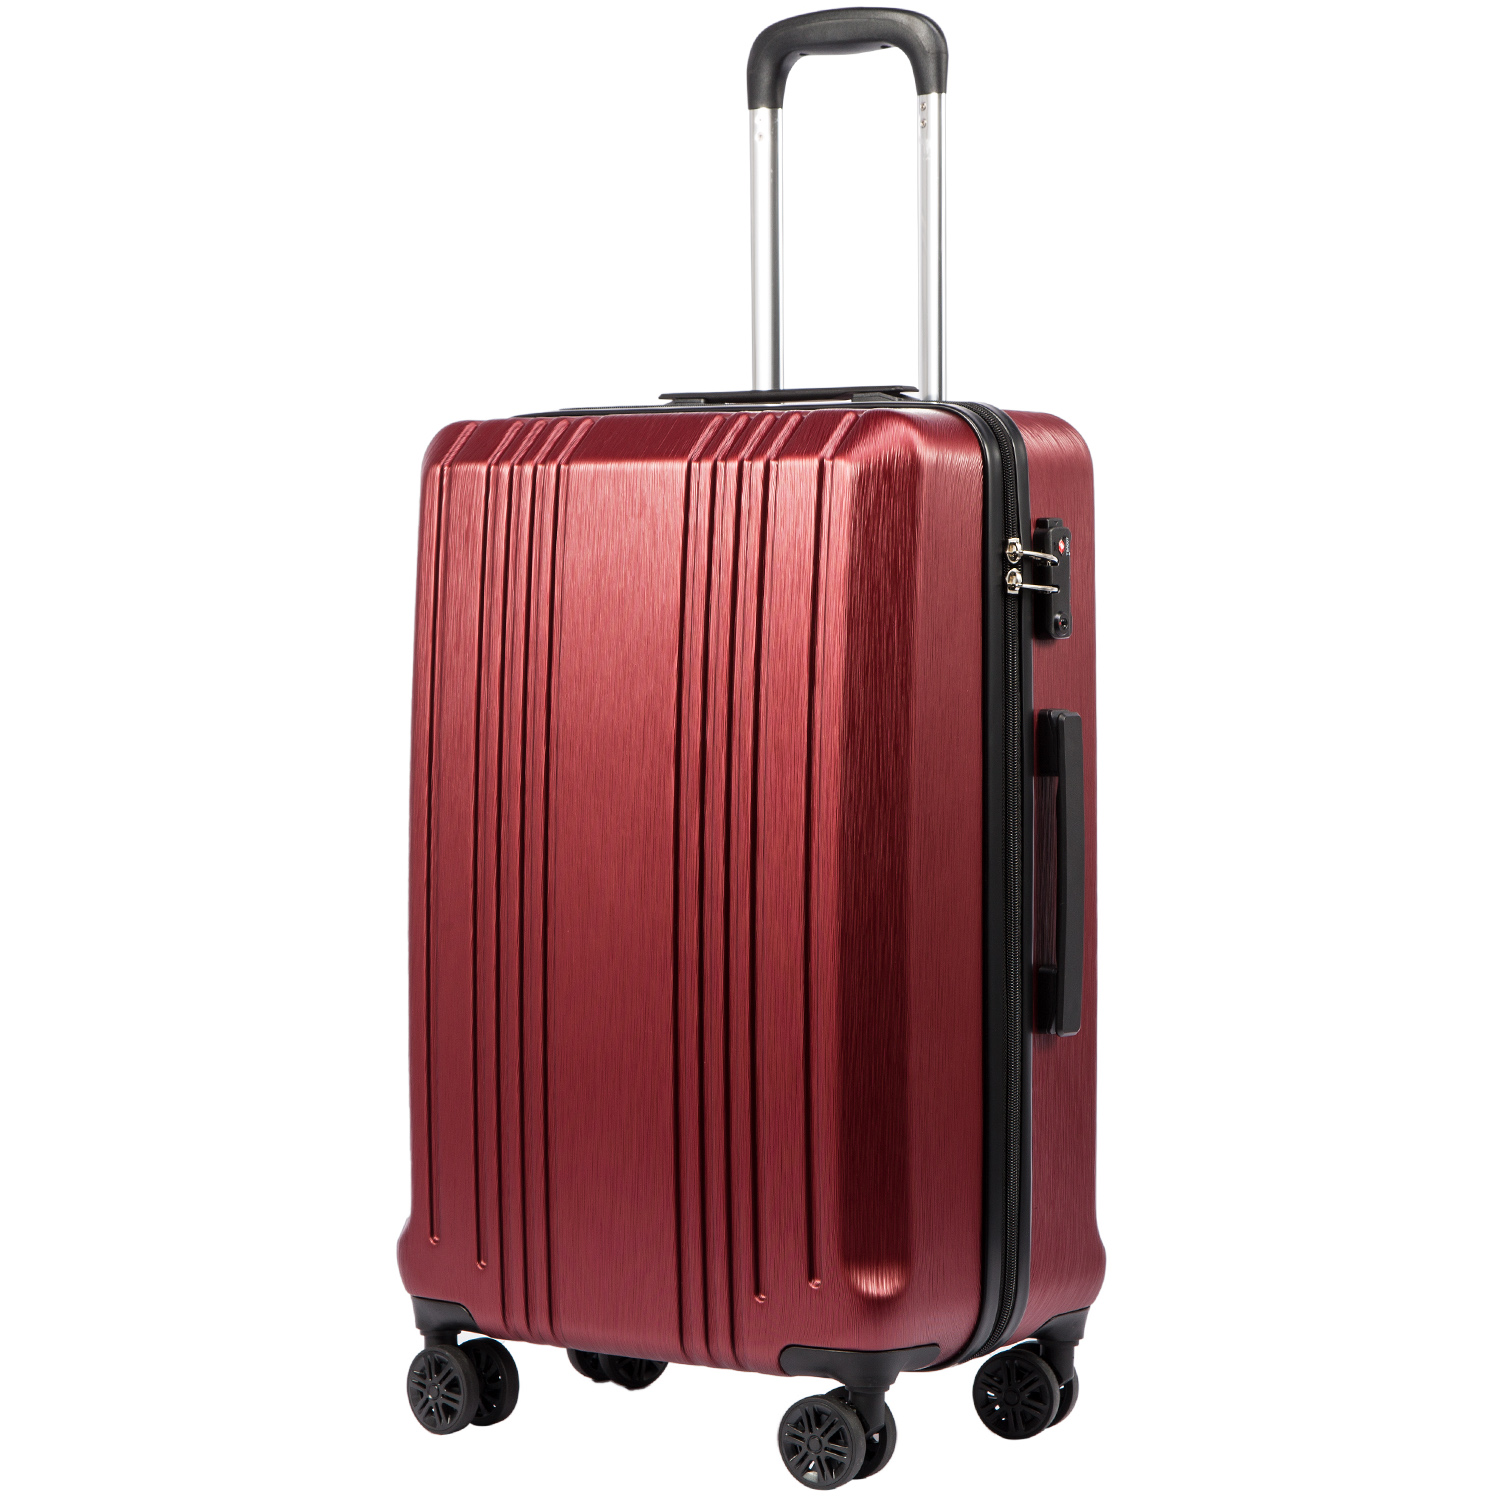 Coolife Luggage Suitcase PC+ABS with TSA Lock Spinner Carry on Hardshell Lightweight 20in 24in 28in  YD60S/M/L